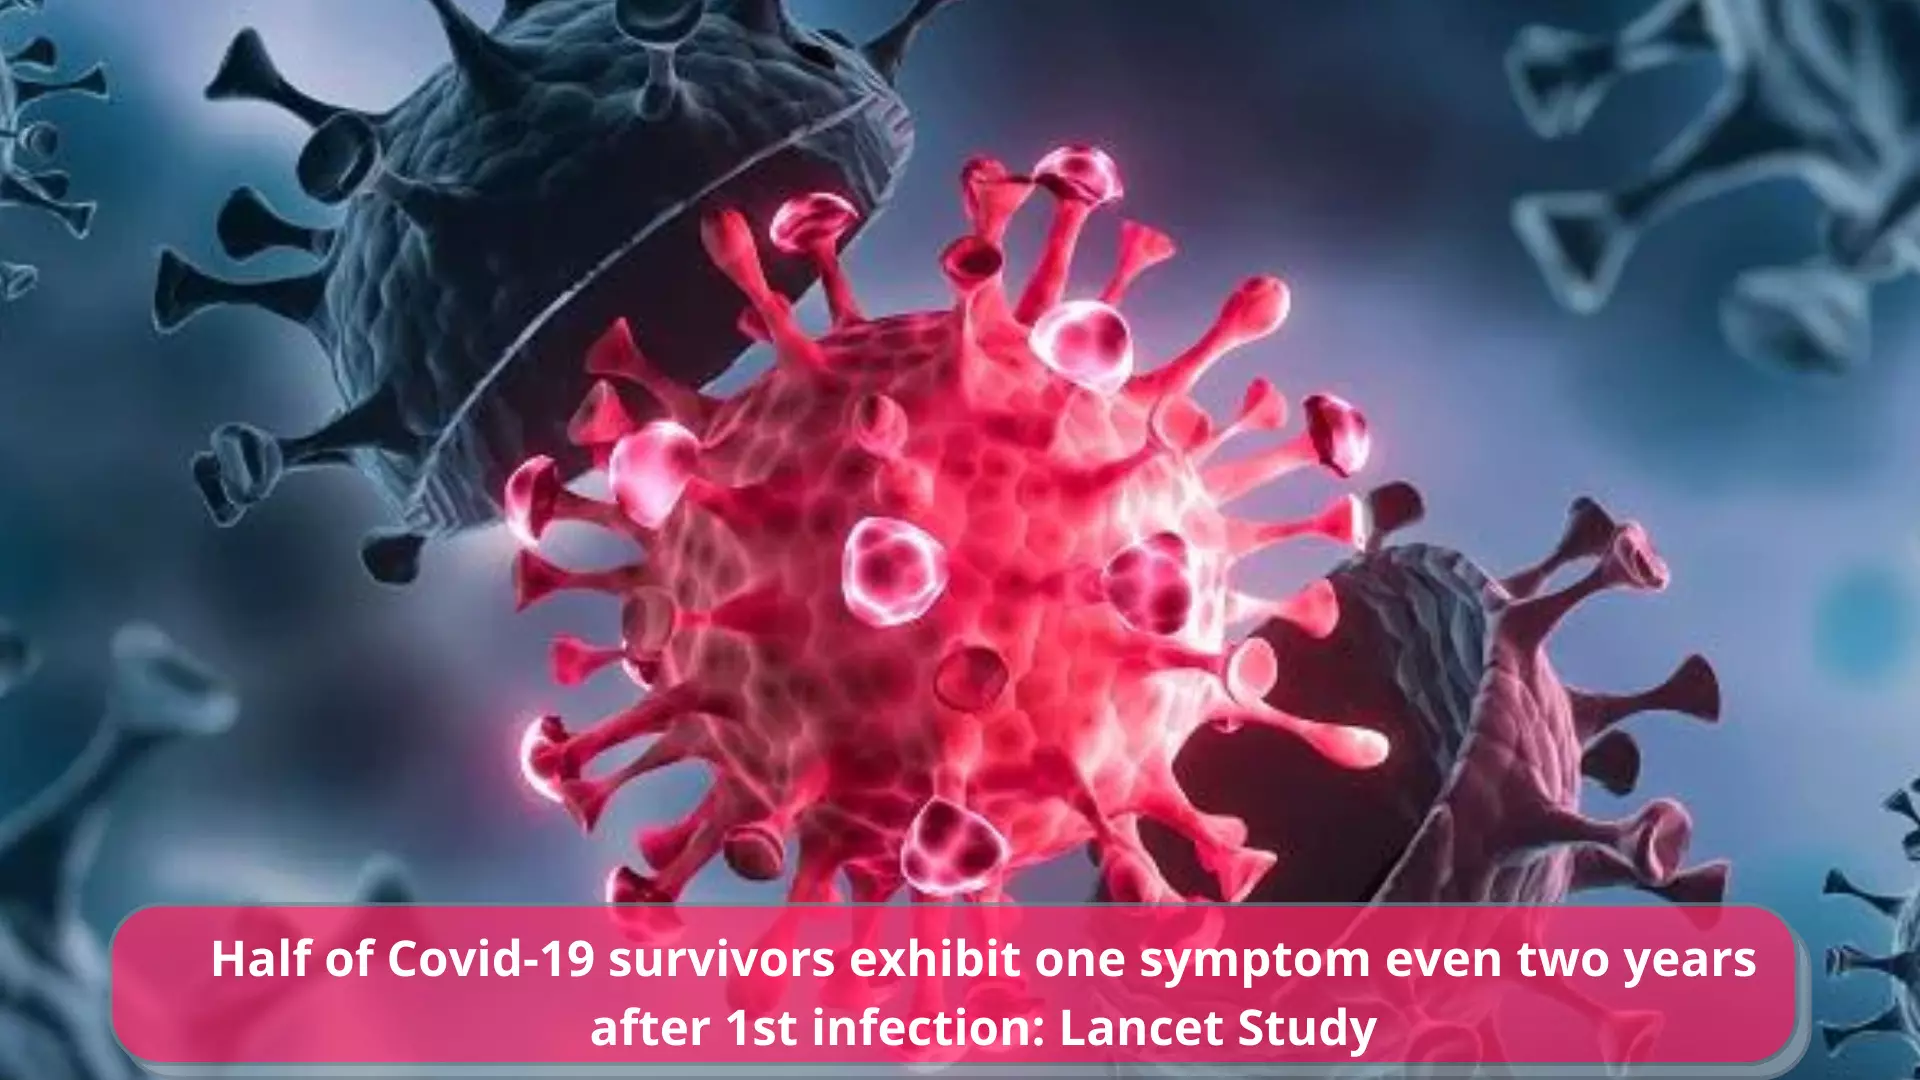 Half of Covid-19 survivors exhibit one symptom after two years of 1st infection